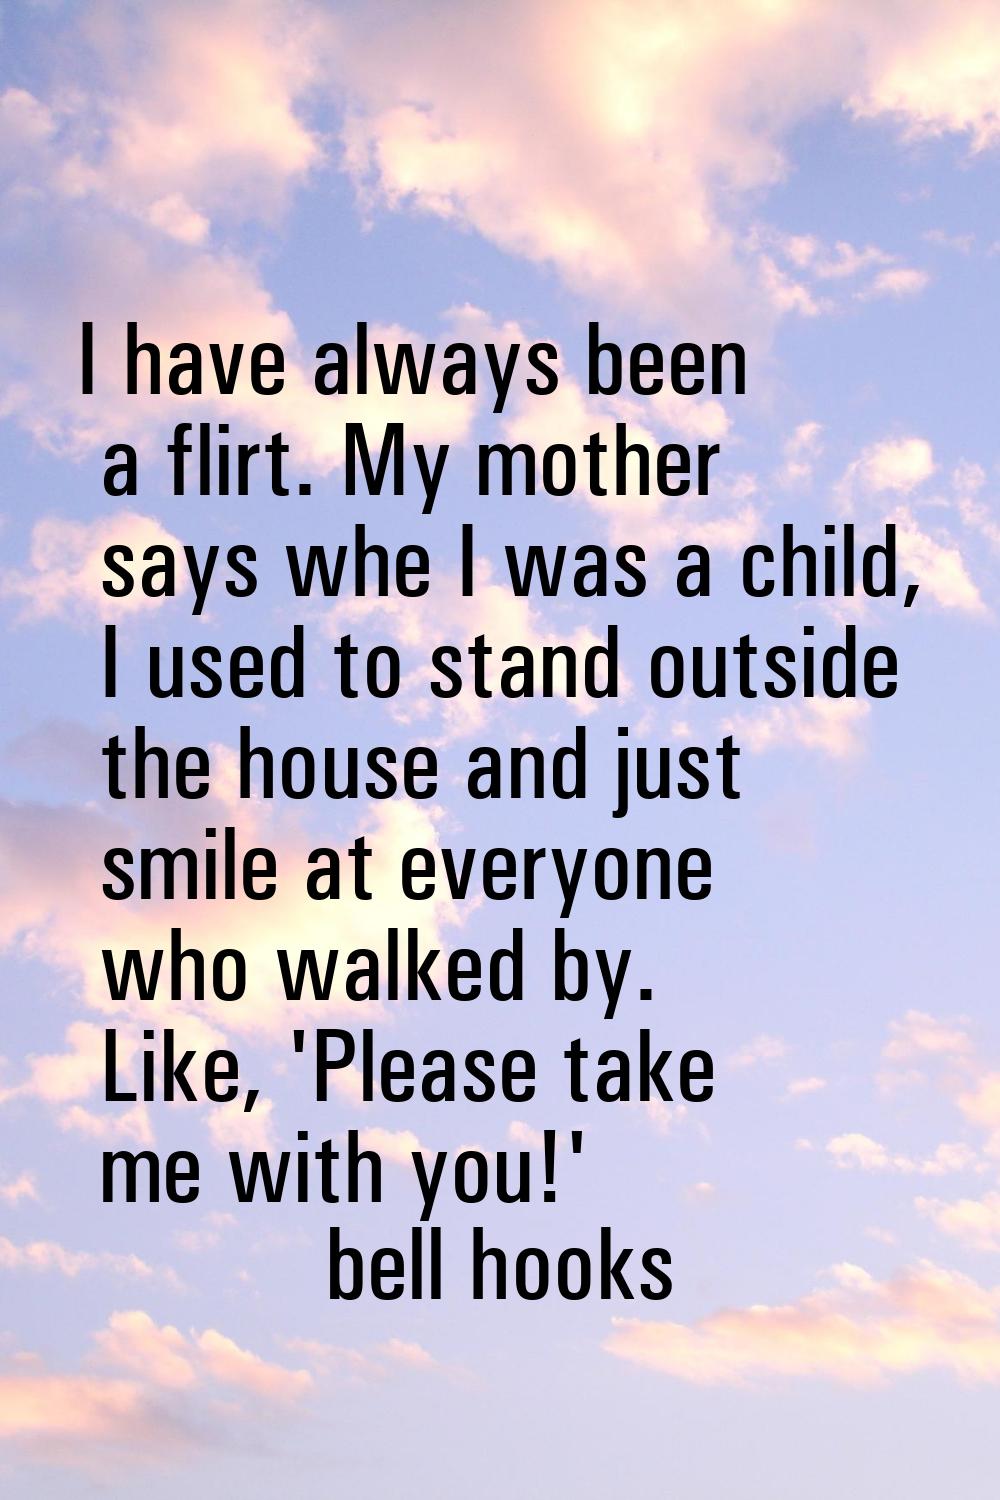 I have always been a flirt. My mother says whe I was a child, I used to stand outside the house and